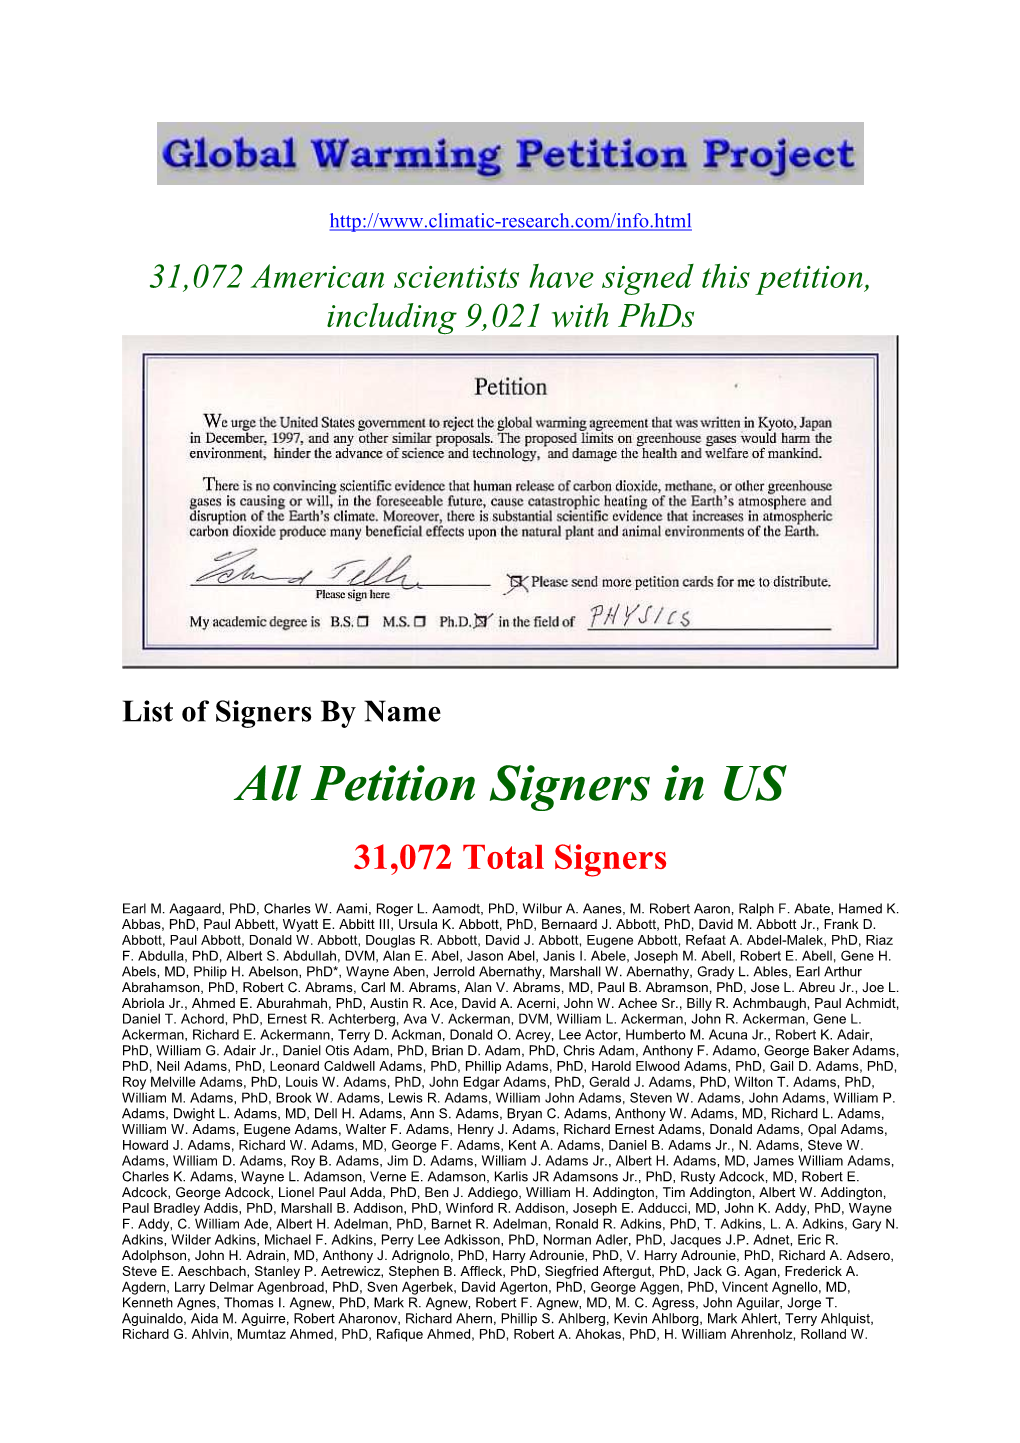 31072 Total Petition Signers in US